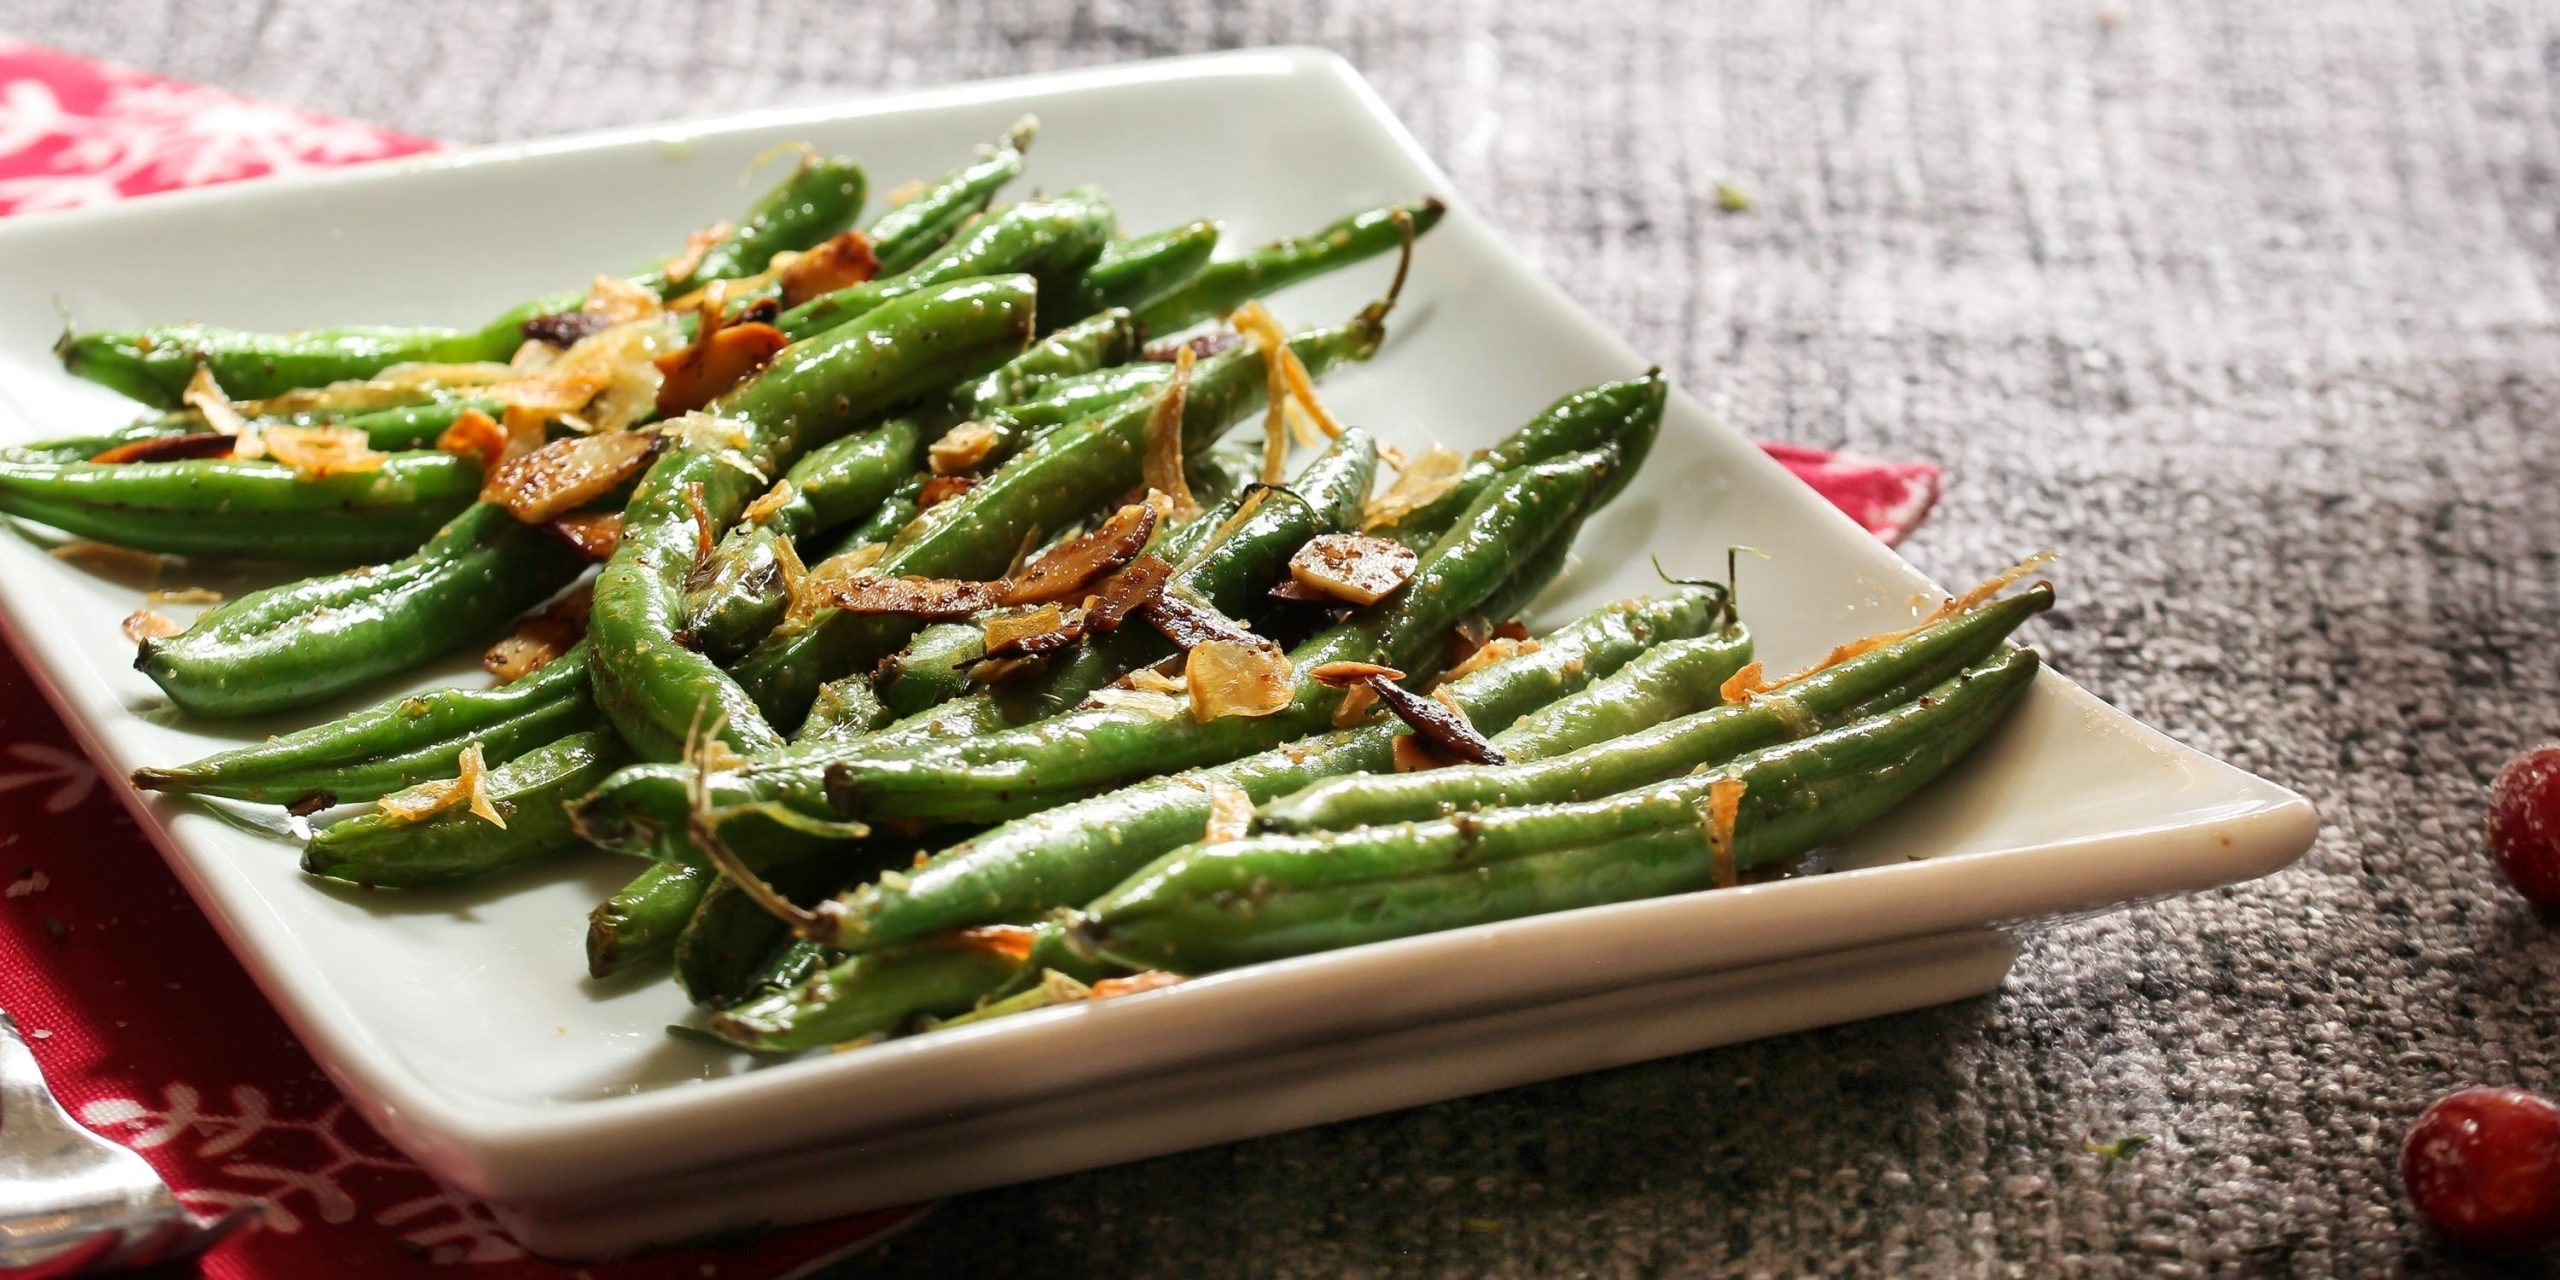 Roasted green beans topped with fried shallots and almonds.